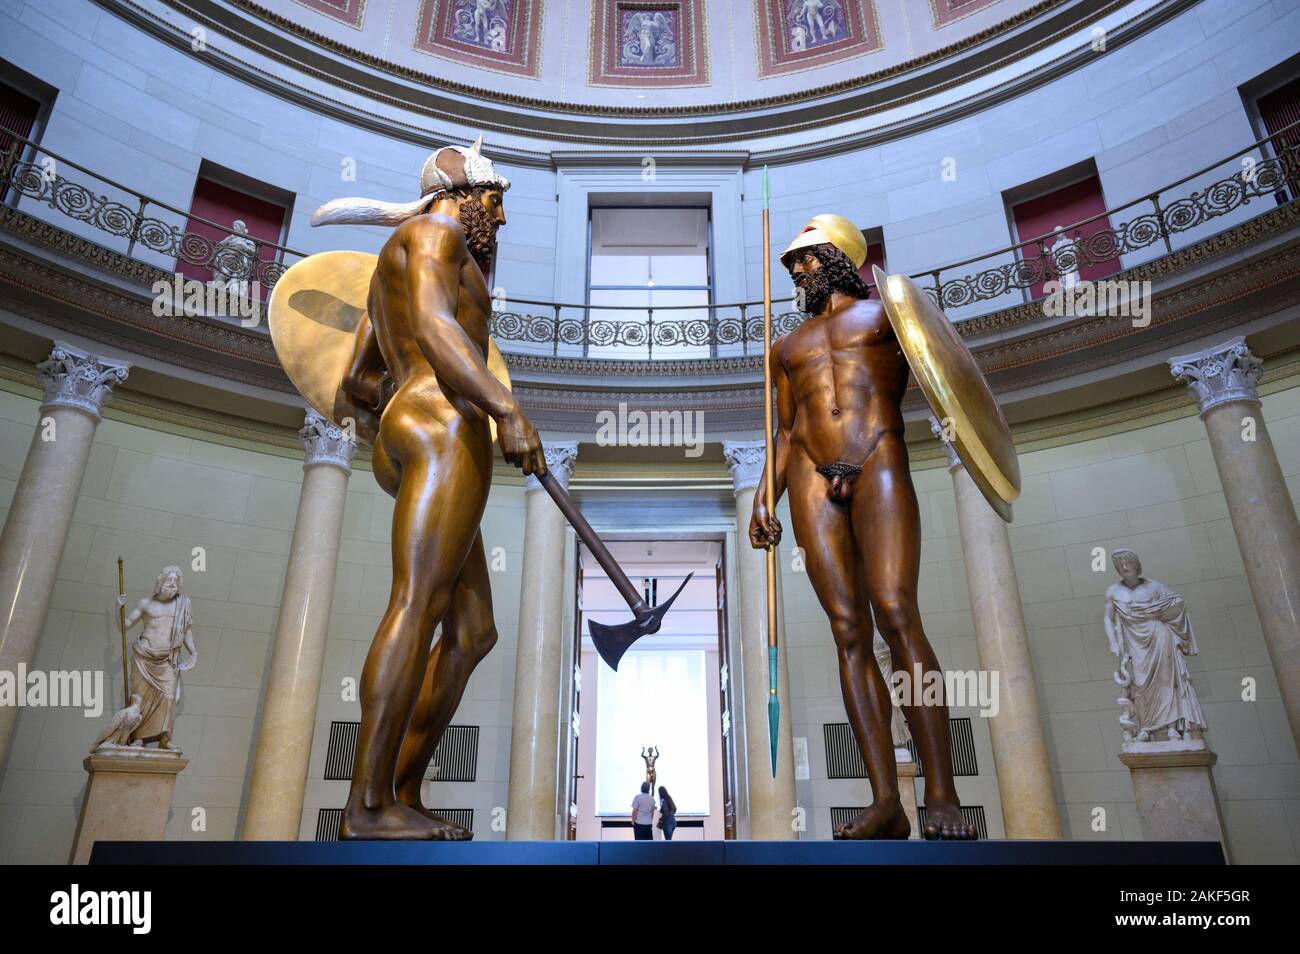 Berlin. Germany. Reconstruction of the ancient Greek bronze statues known as the Riace Warriors (aka Riace Bronzes), showing how the statues may have Stock Photo